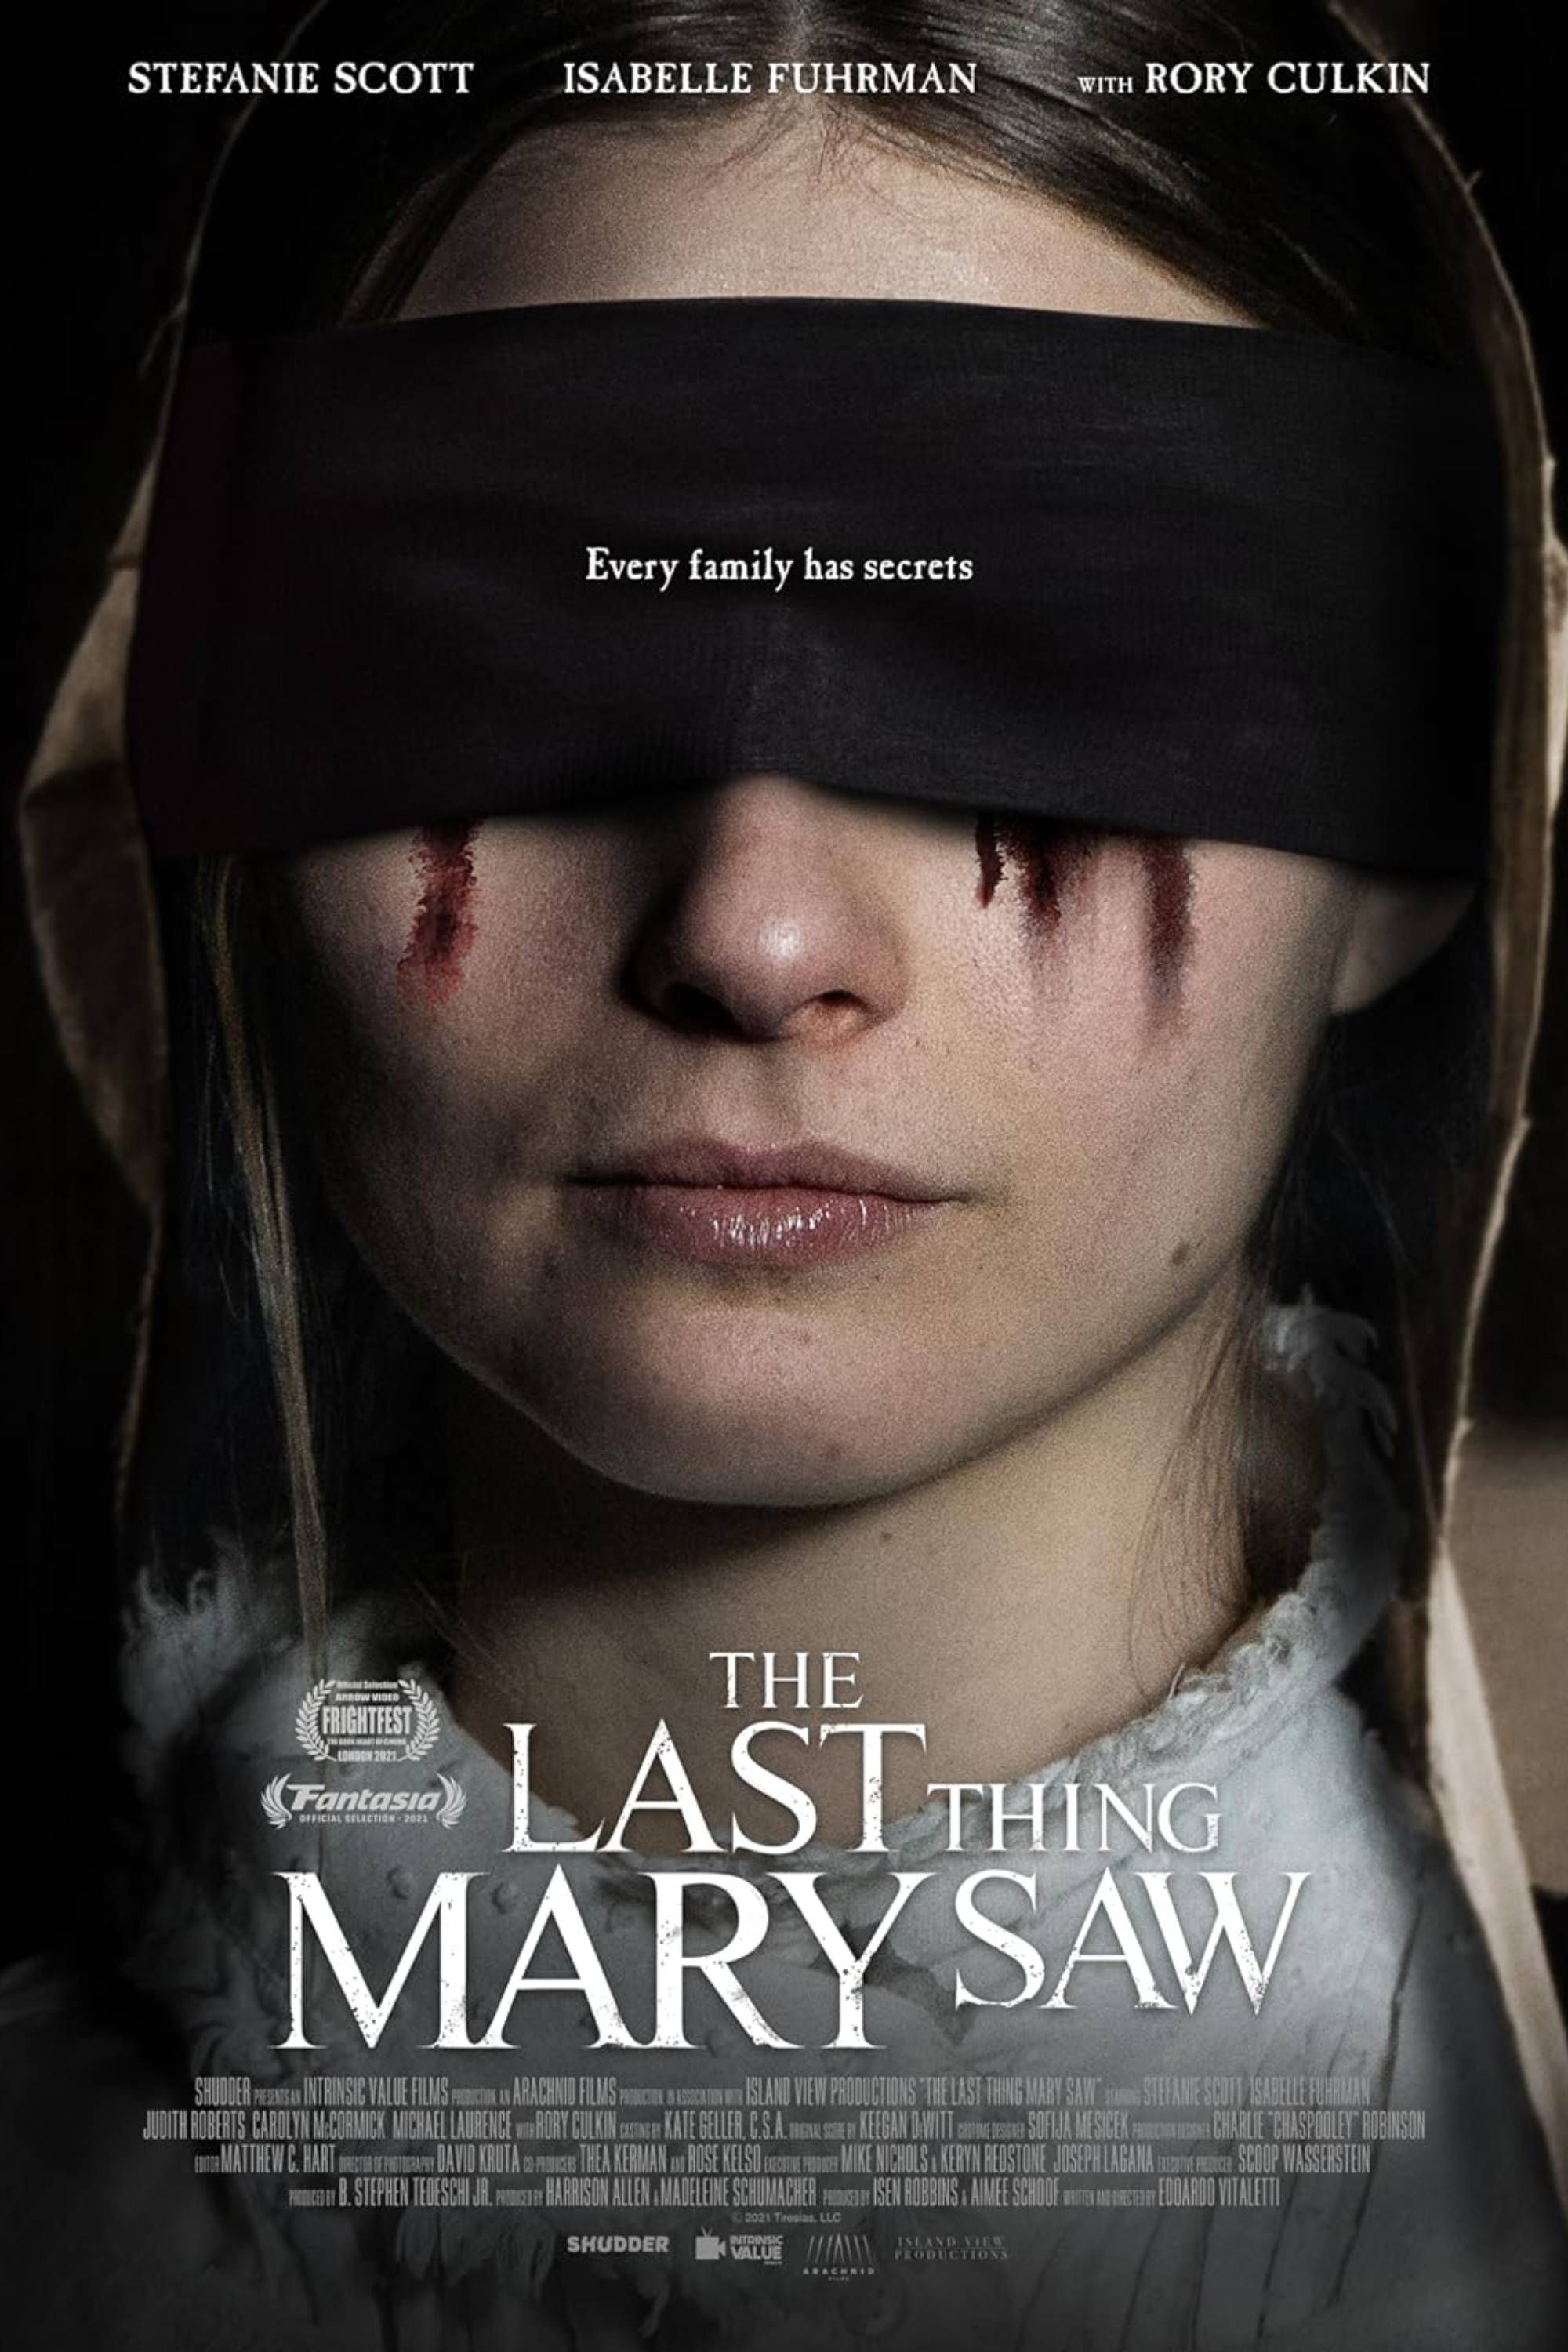 the-last-thing-mary-saw-poster-stefanie-scott-wearing-a-blindfold.jpg